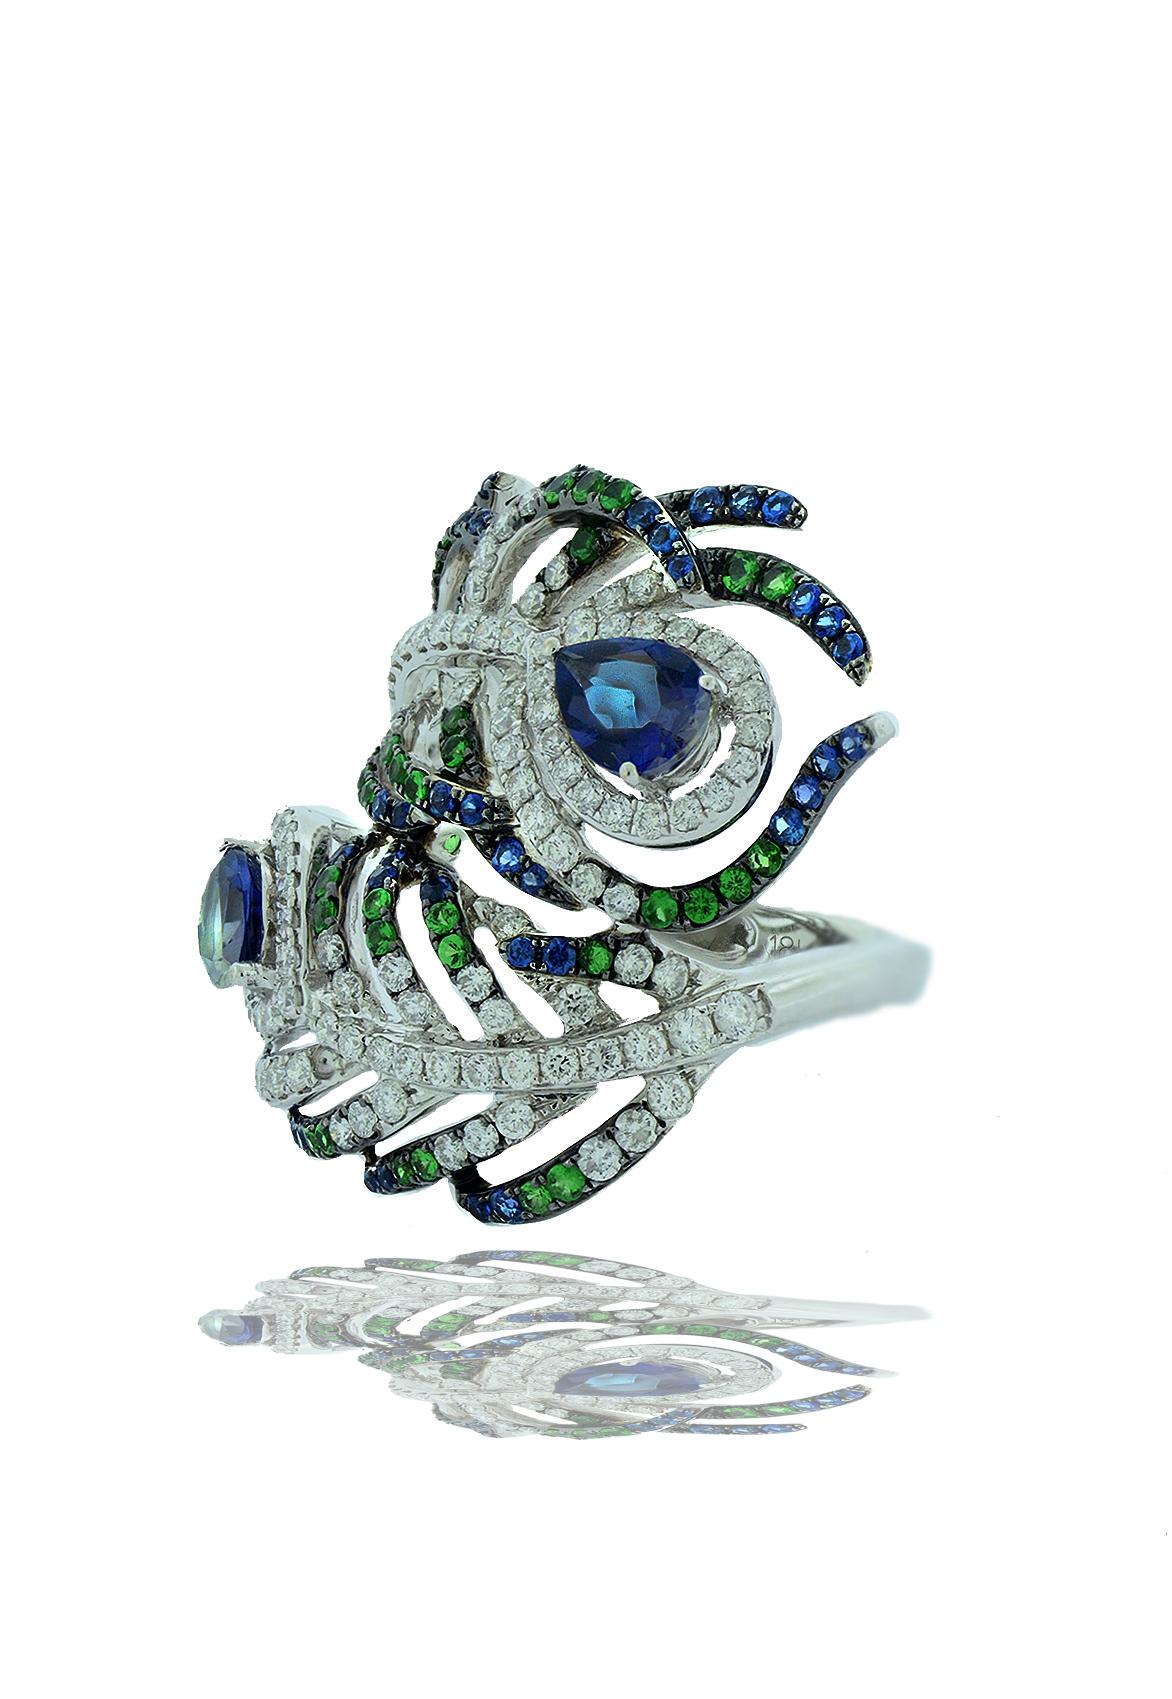 A light hearted and fun ring, this gemstone and diamond ring has the form of peacock feathers.  This ring has 1.2 carats of blue sapphire complimented by .50 carats of electric green tsavorite garnets and 1.5 carats of white F-G-VS-SI.  There are